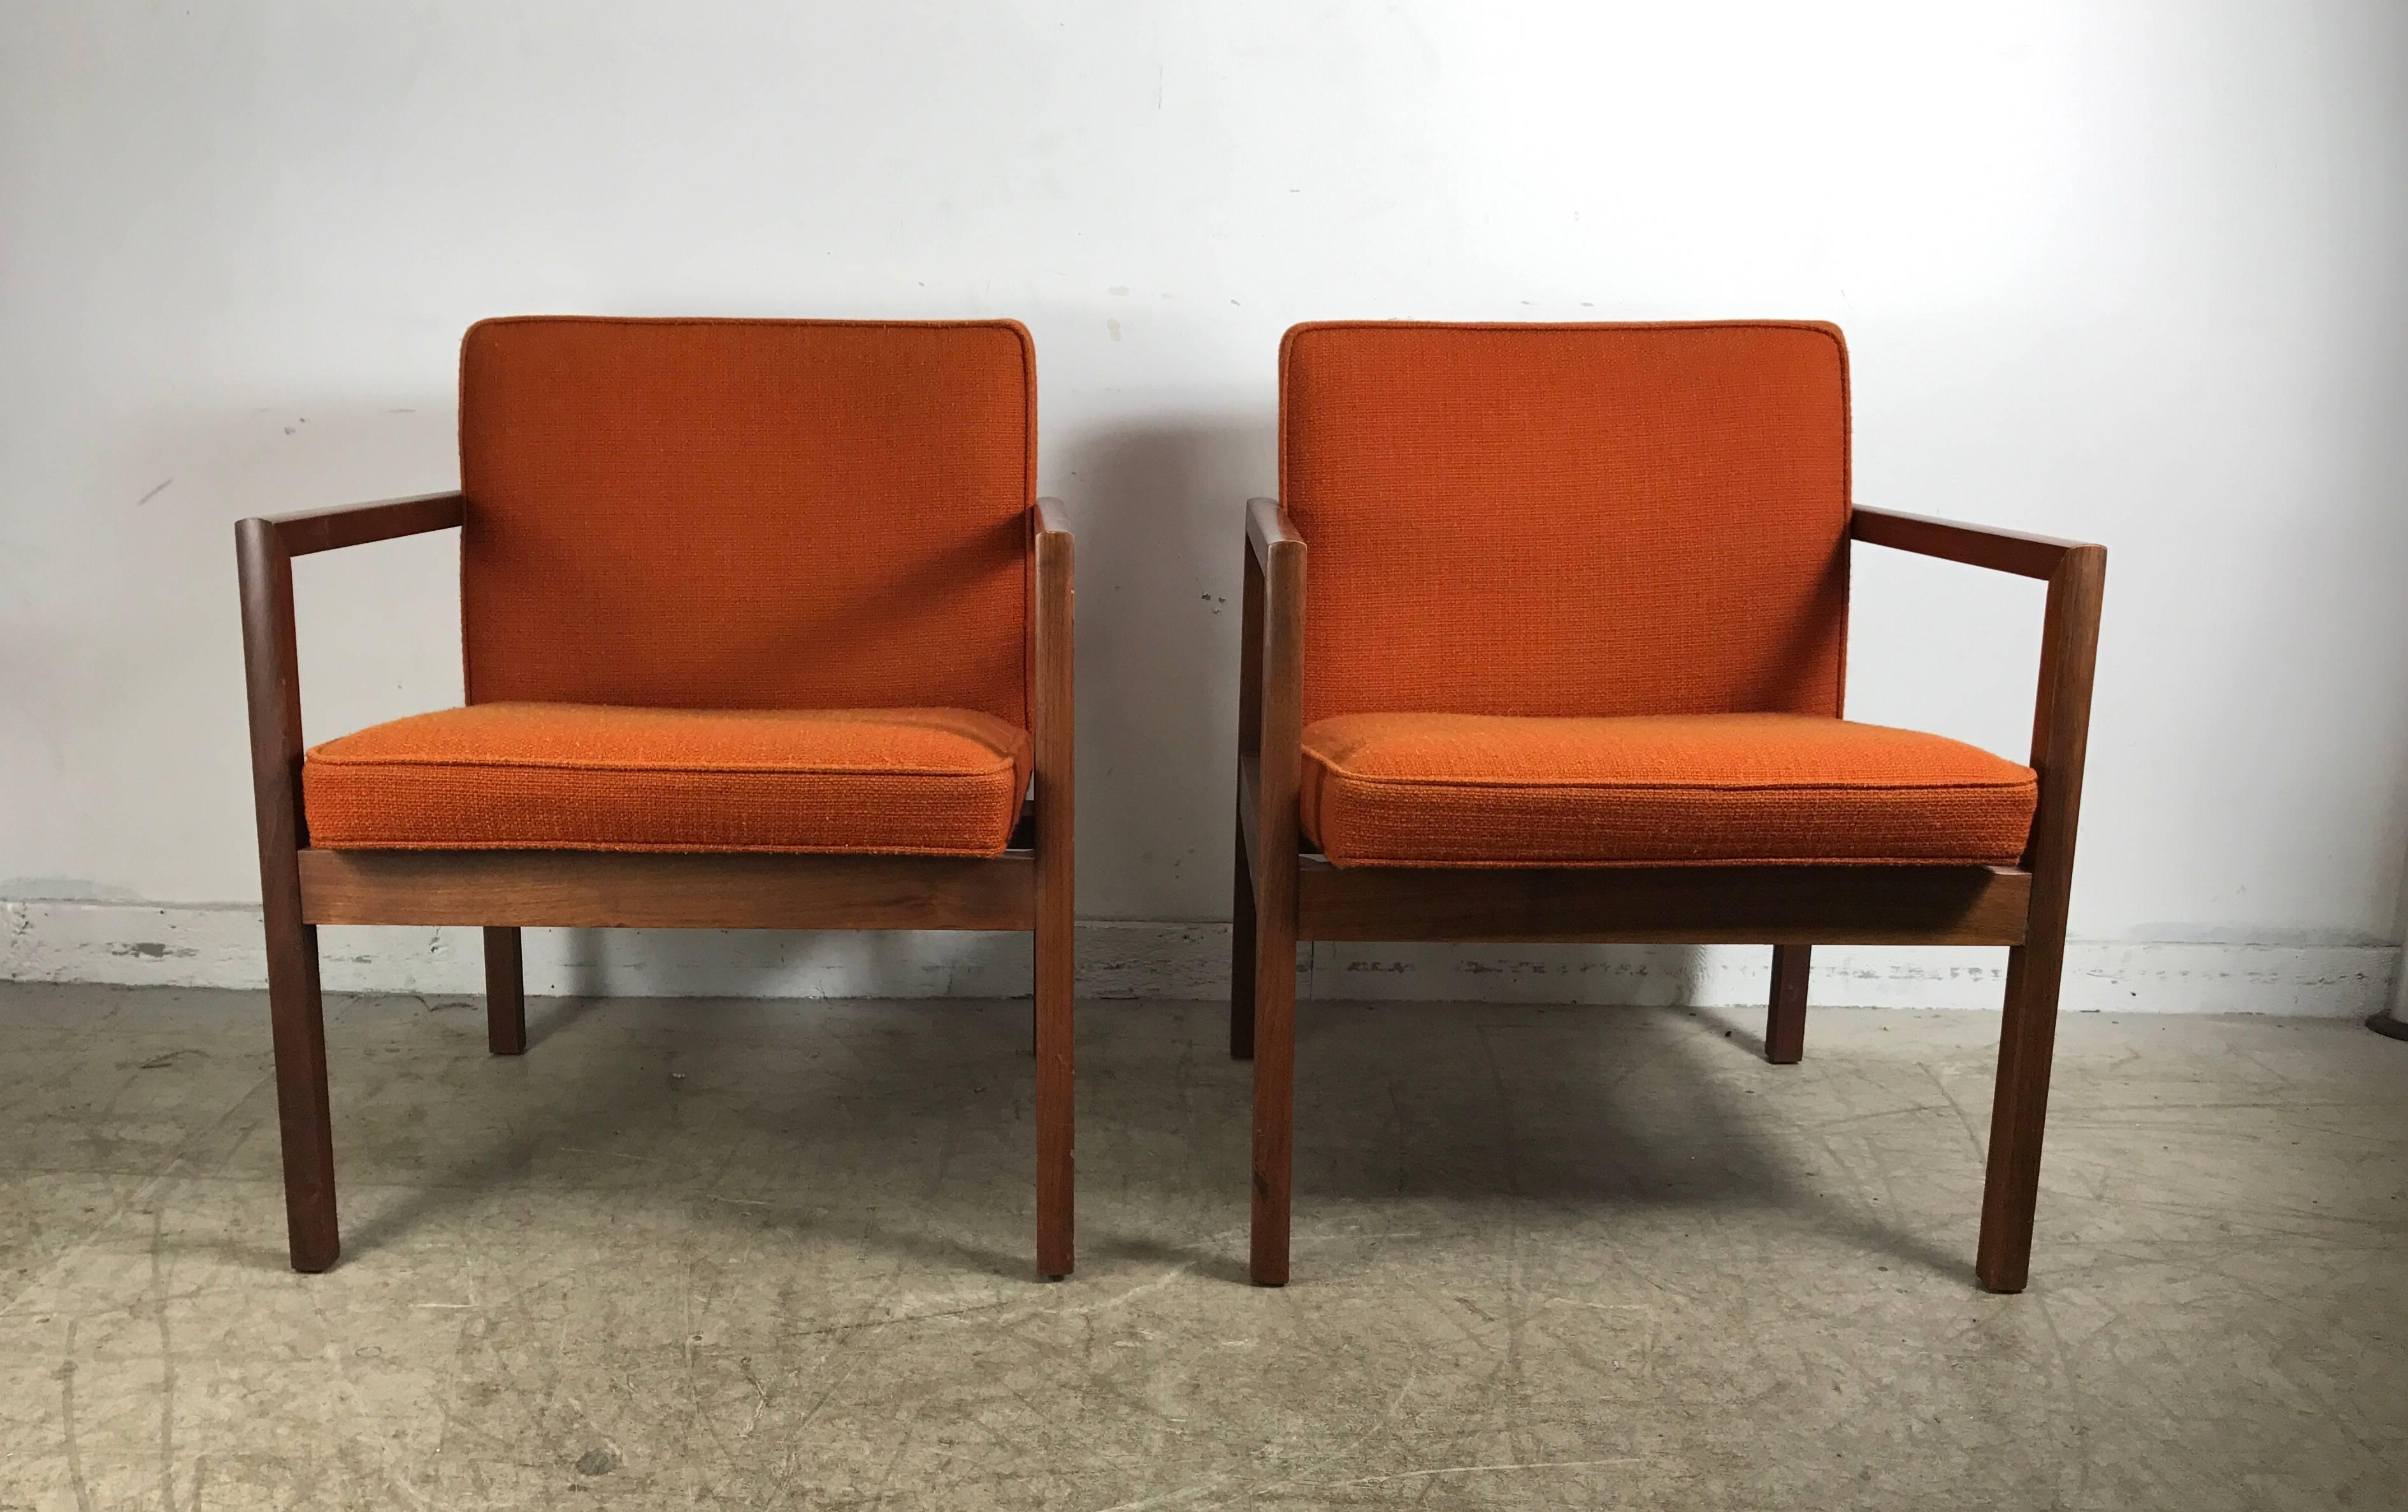 Pair midcentury solid walnut lounge chairs by Stow Davis, handsome architectural profile in the style of Jens Risom. Superior quality and construction, retains original orange wool fabric, extremely comfortable, total of four chairs available.